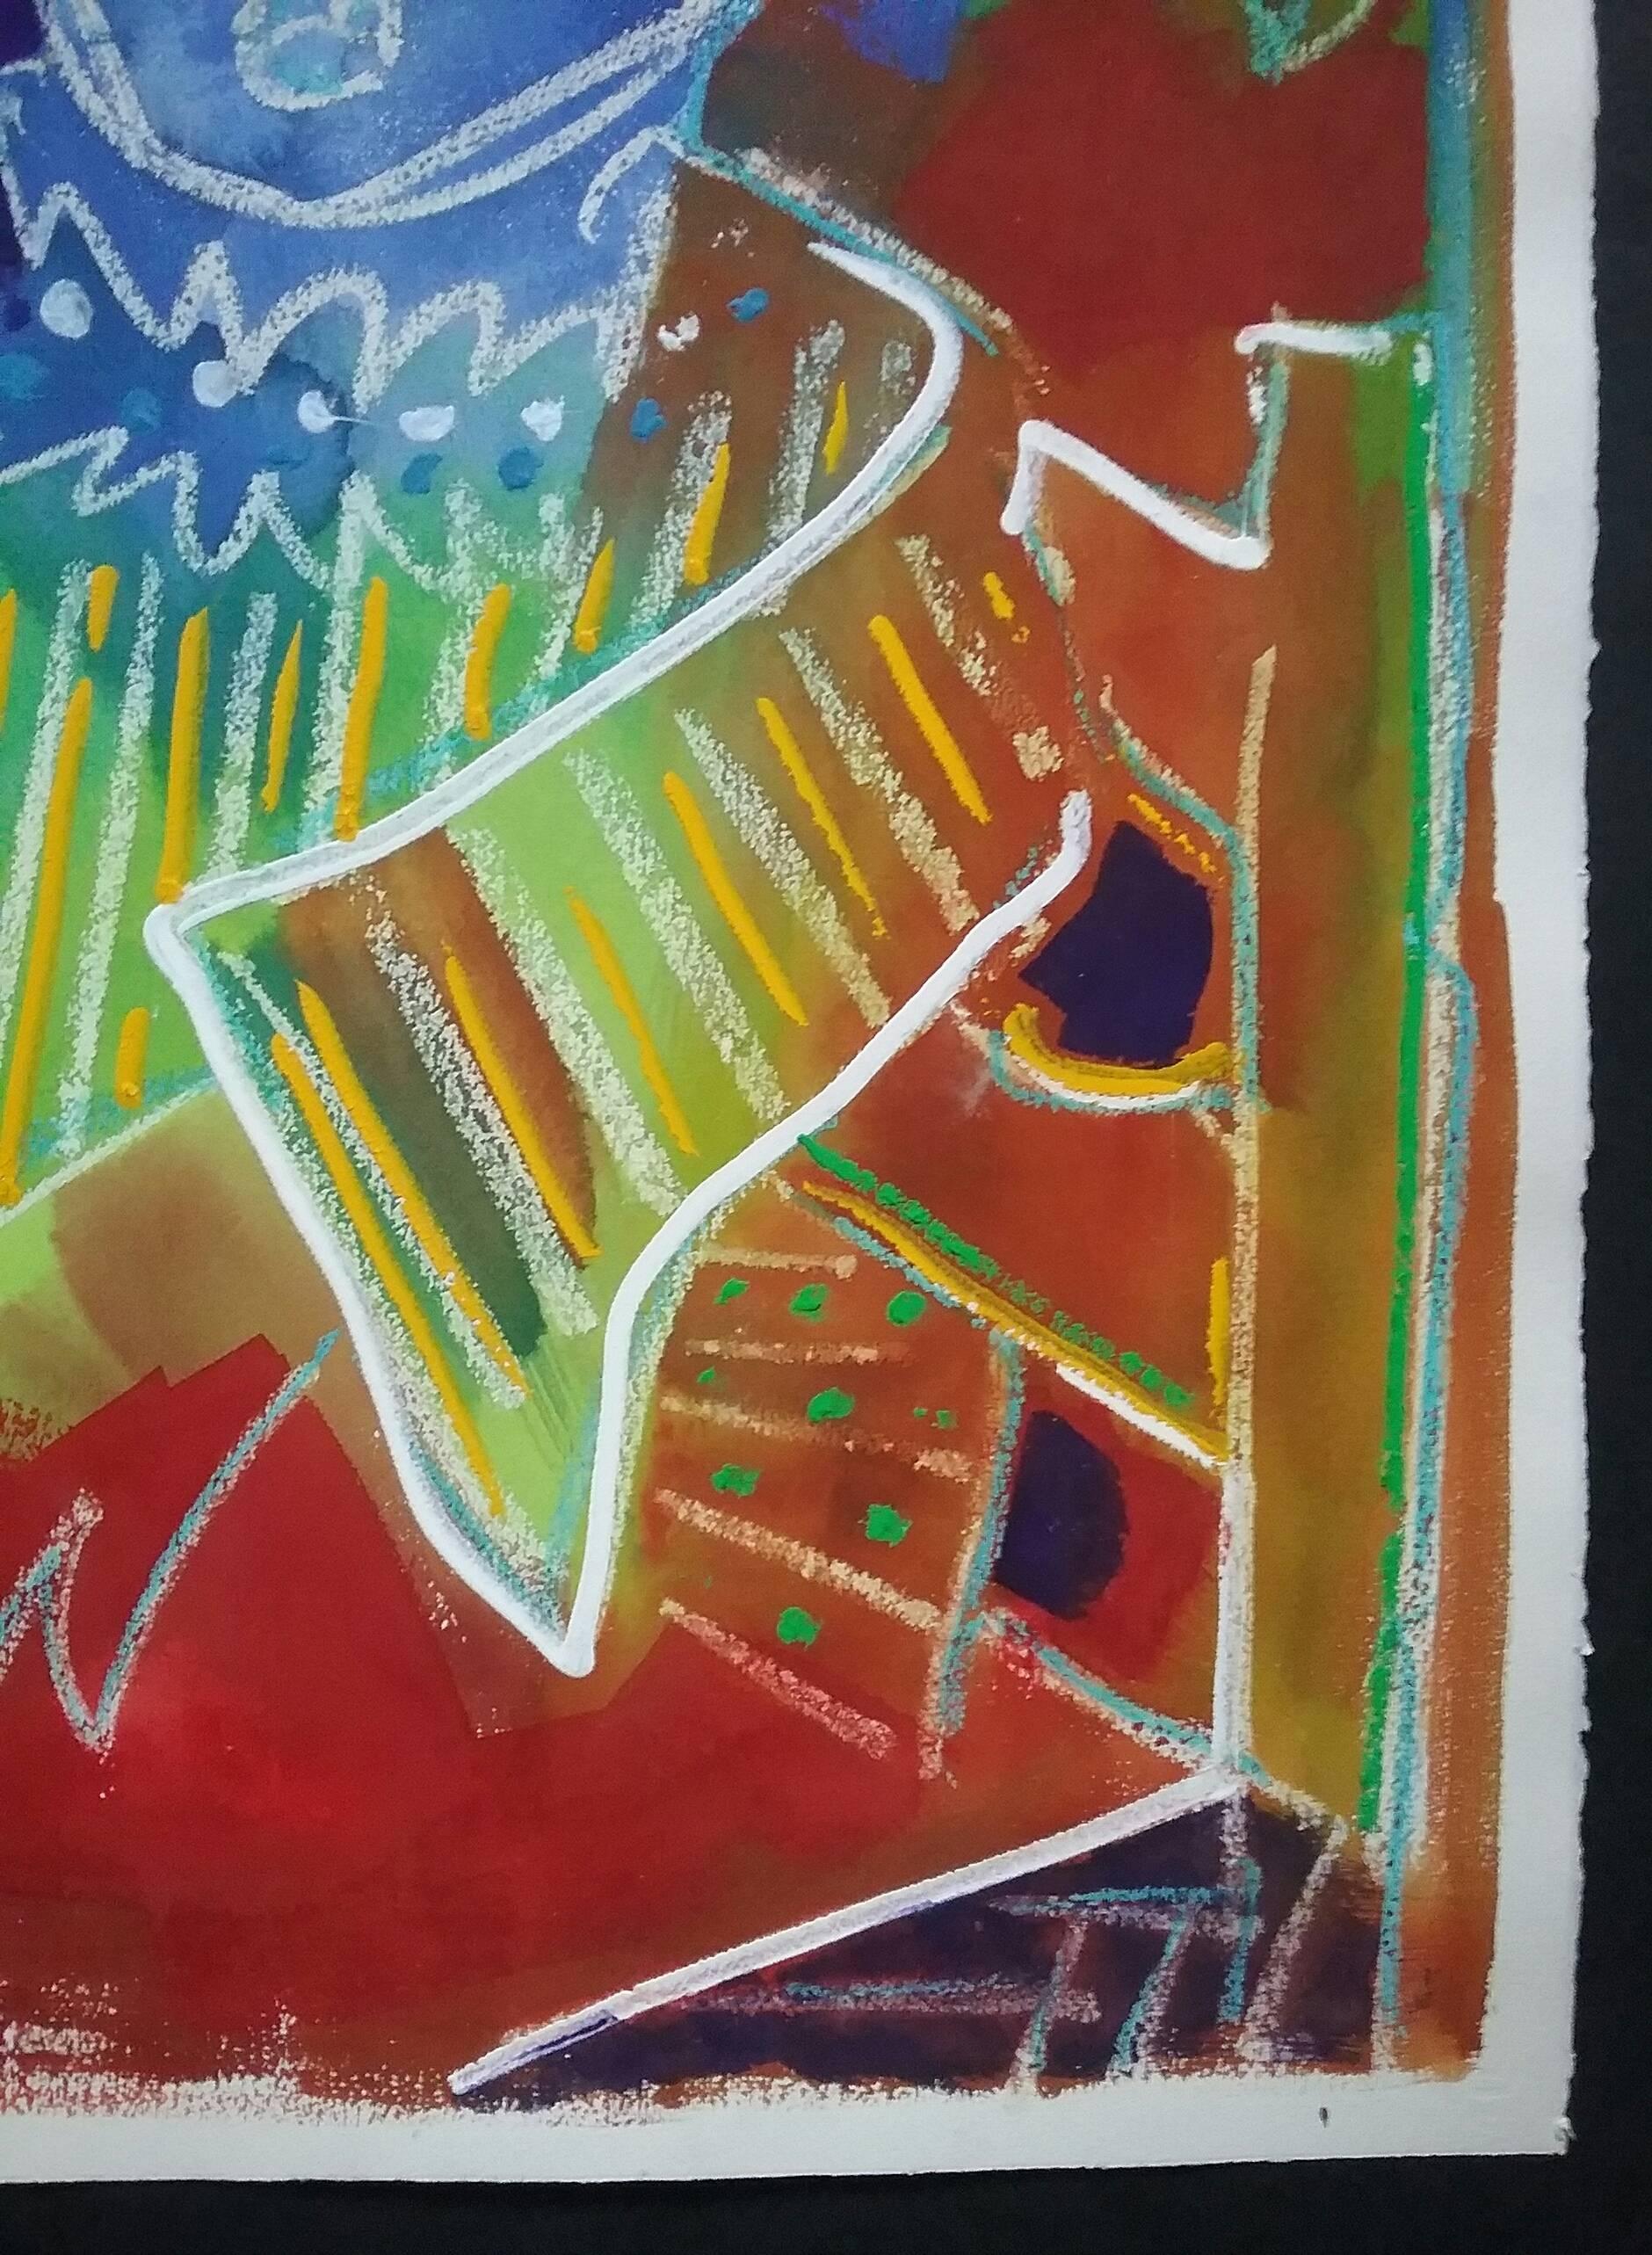 Title: Sam.  Artist: John Alvaro Caldas 1934-2006.  Oil/oil pastel/oil crayon on French arches paper.  Signed and dated '84.  30inches x 22 inches.  76cms x 56cms.  Unframed. Predominant colours of red, blue, yellow and green.

John Alvaro Caldas